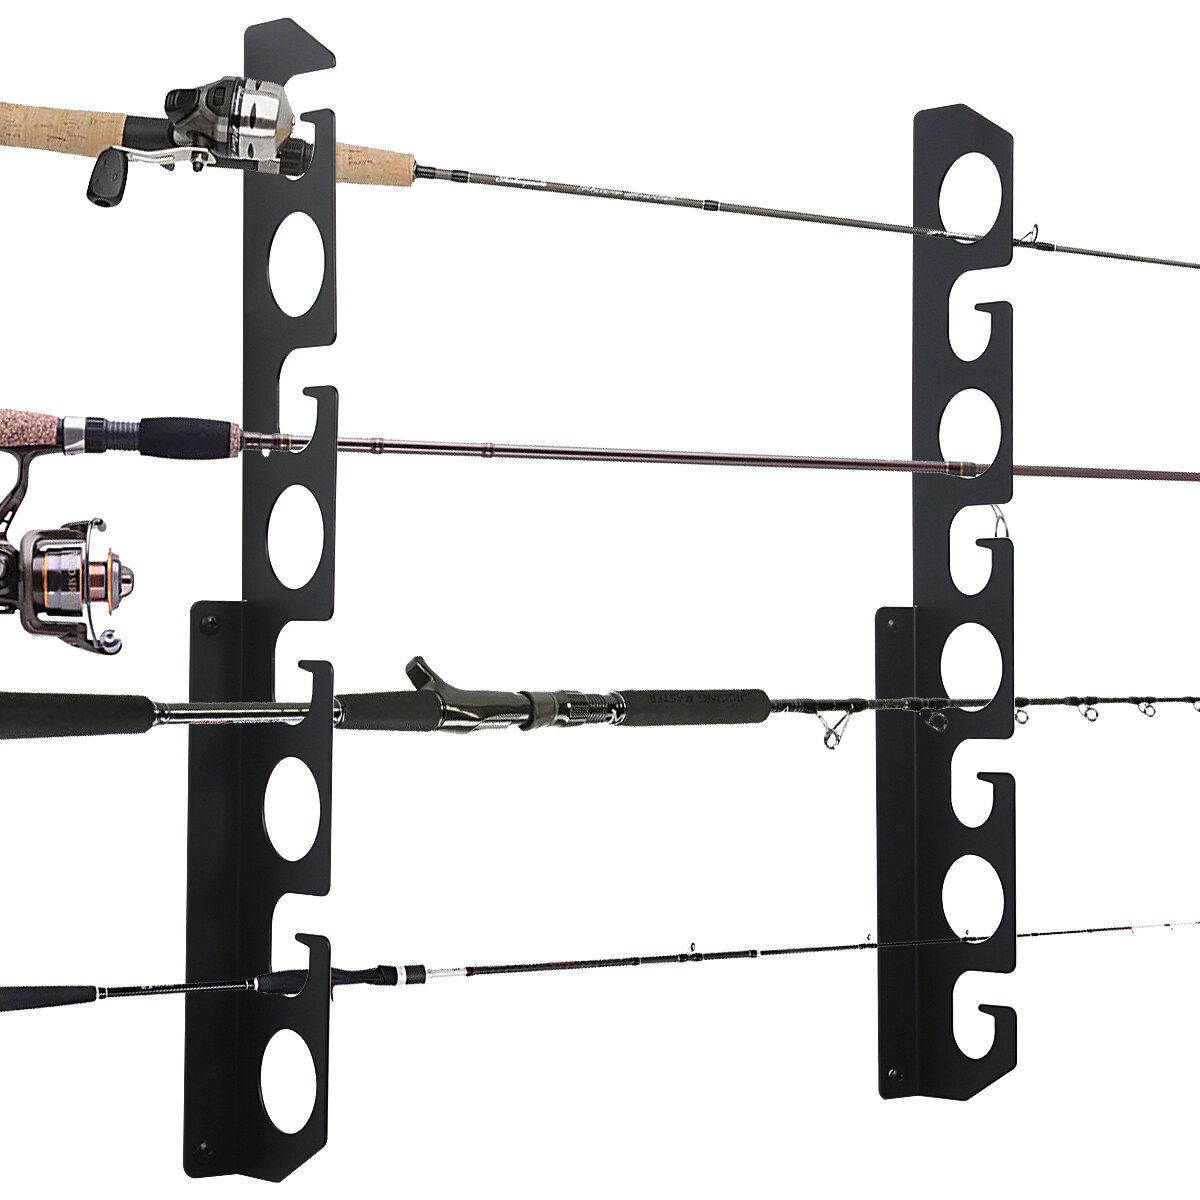 Heavy-Duty Fishing Rod Holder - Holds Up to 9 Rods or Combos - Wall Mounted